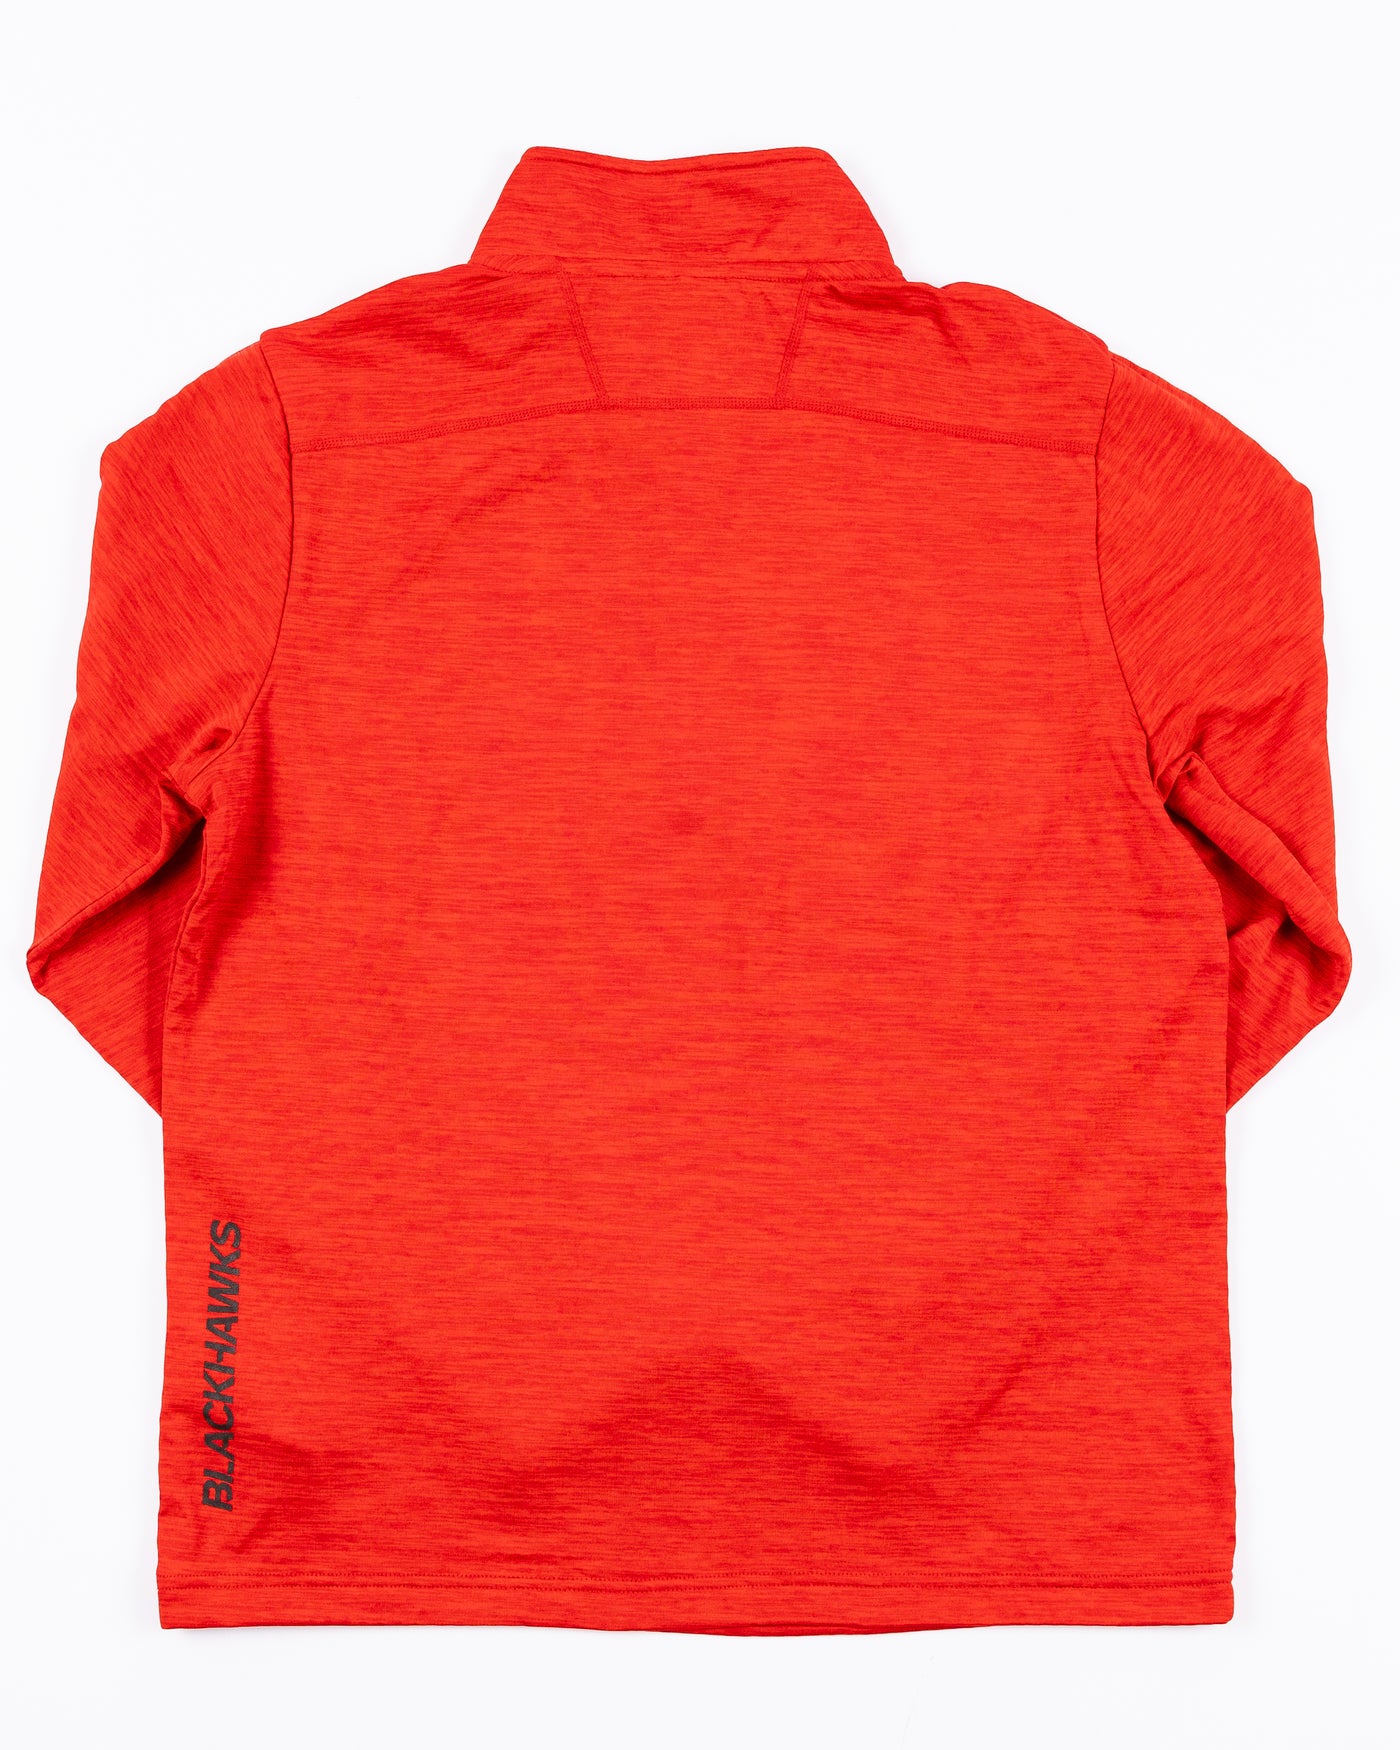 red Fanatics quarter zip with Chicago Blackhawks primary logo on left chest and wordmark on left back - back  lay flat